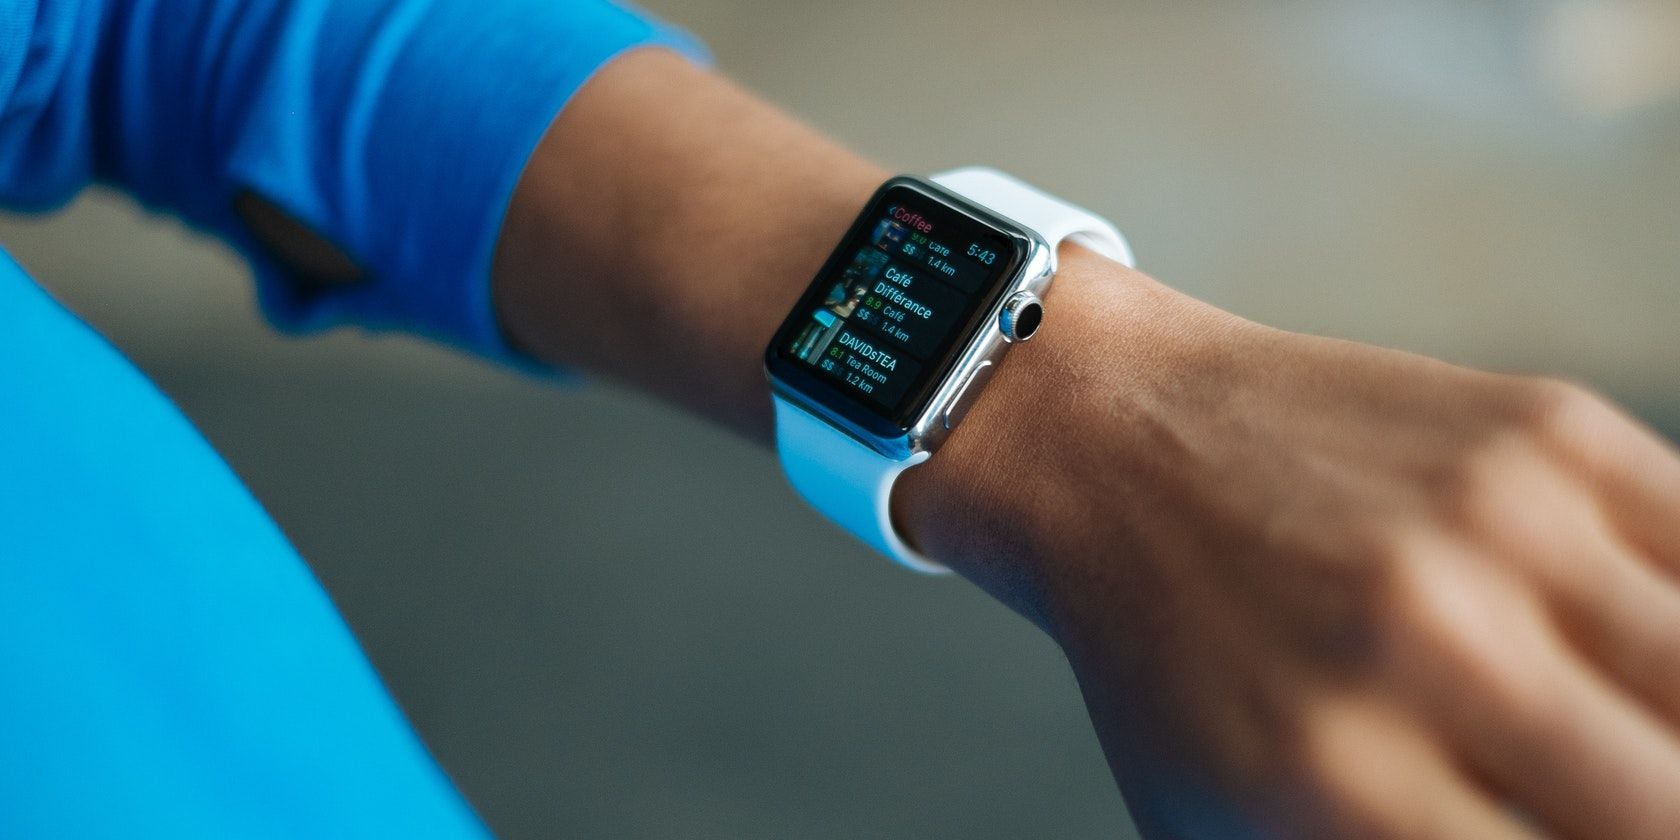 Tracking fitness and health information on fitness devices